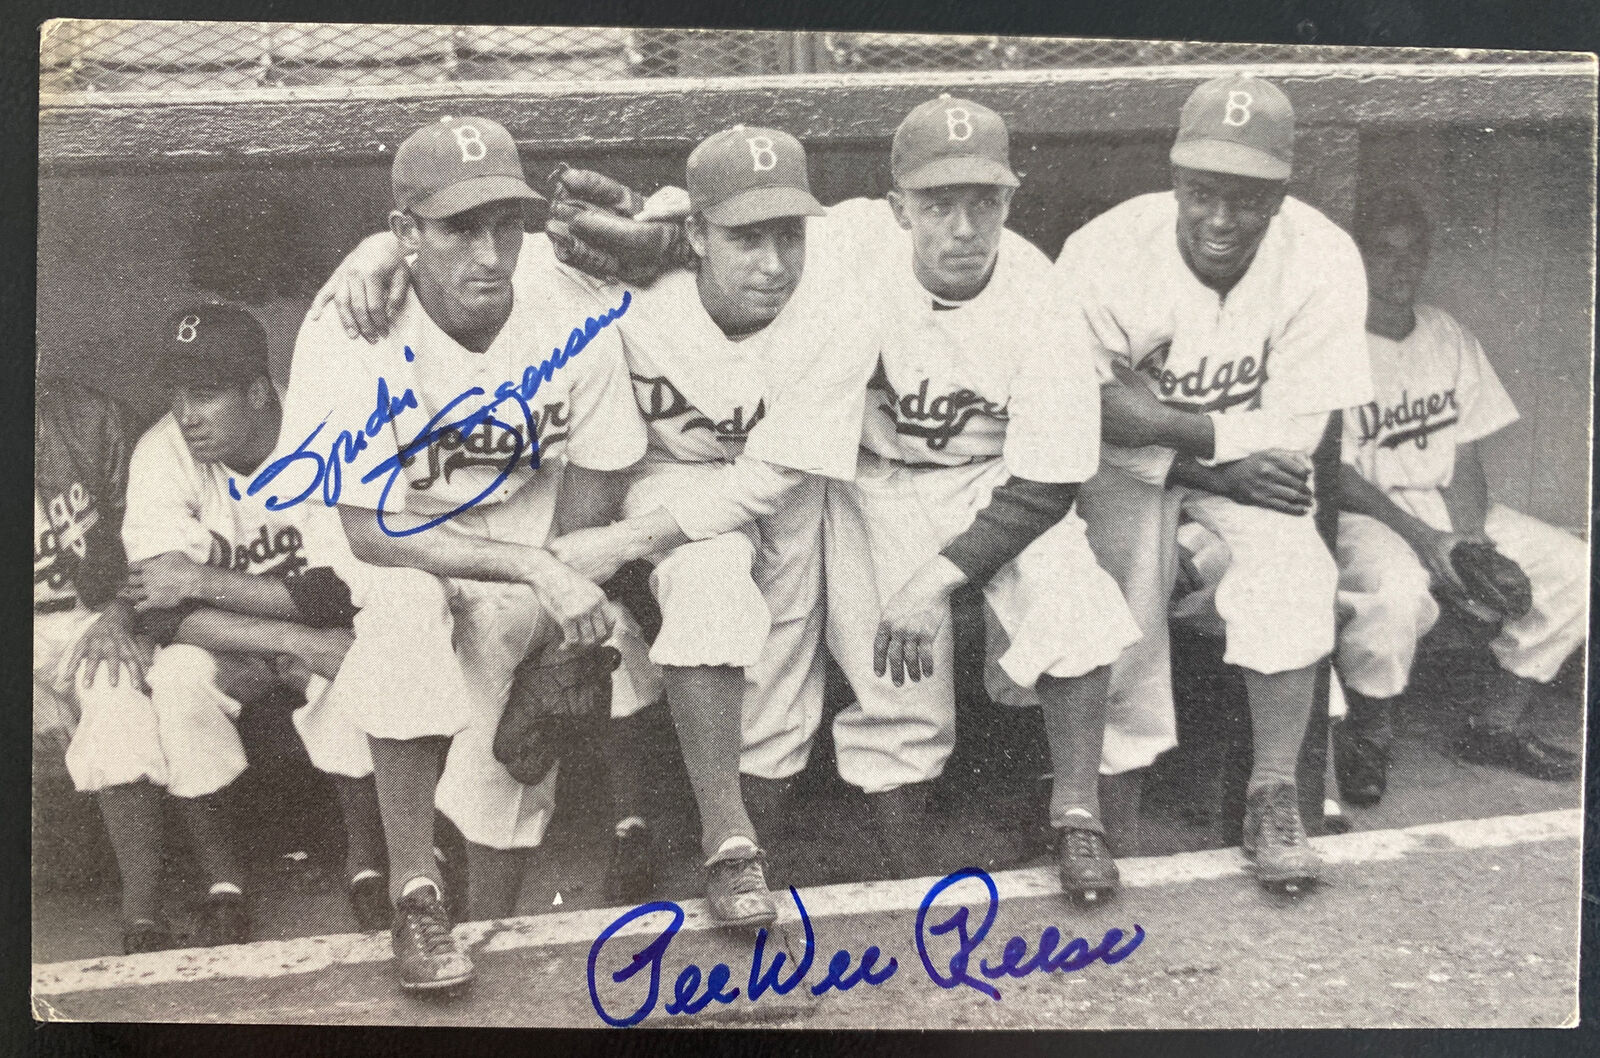 Mint USA Real Picture Postcard Baseball Players  Dodgers Pee Wee Reese Signed